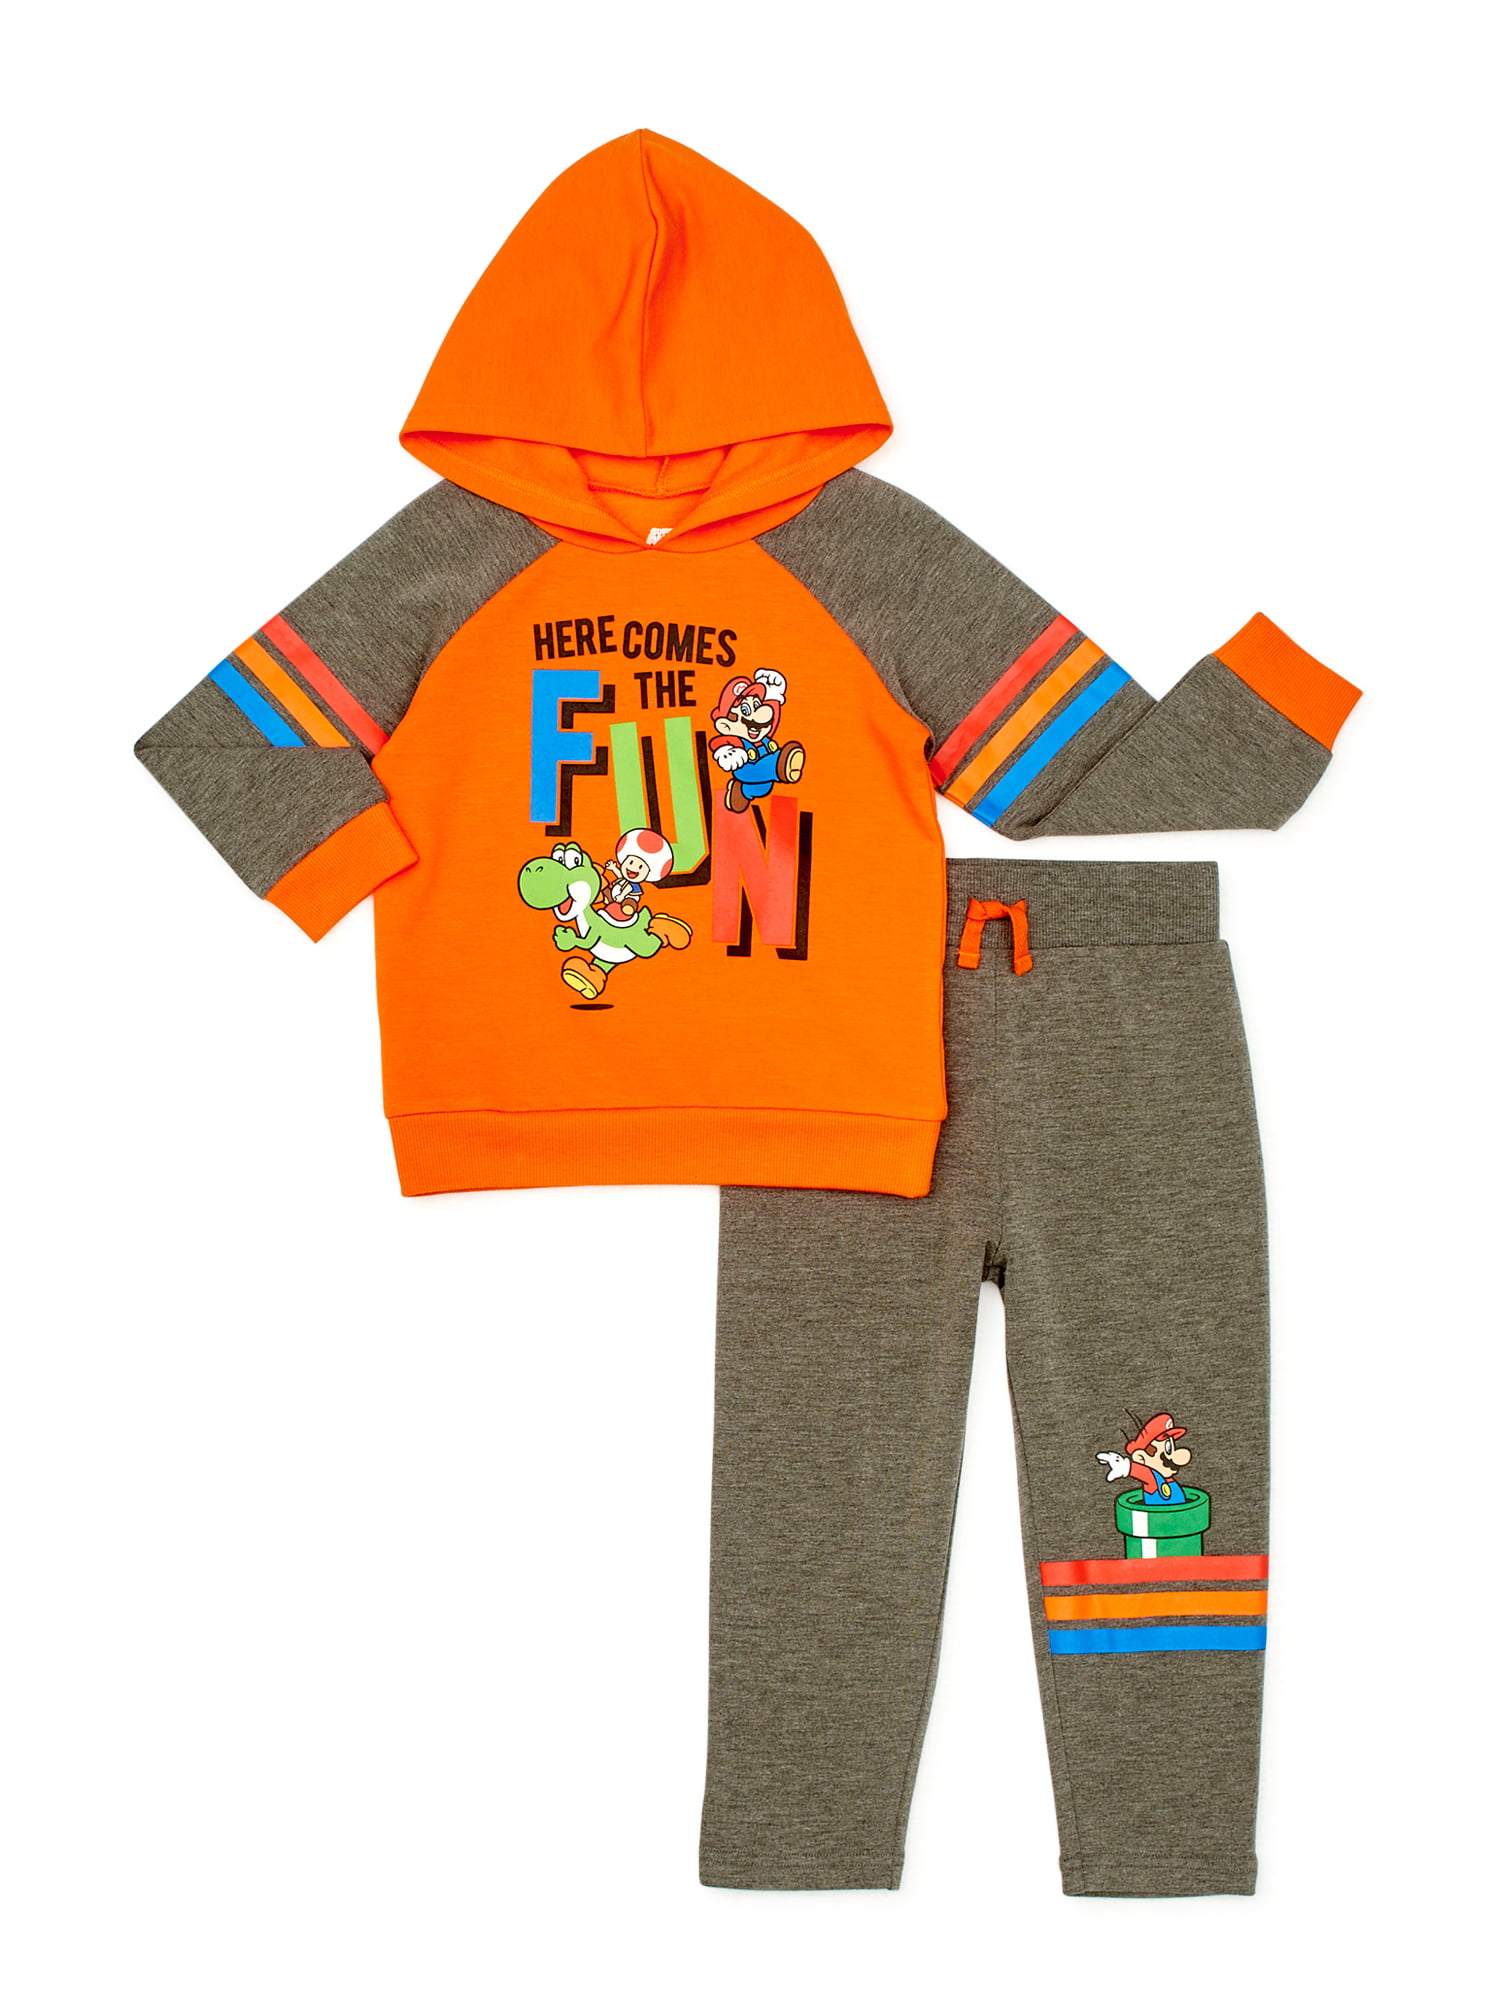 Su-per Ma-Rio Bros Kids 3D Print Hoodie Sweatpants Suits Casual Pullover Sweatshirt Set Outfit for Boys Girls